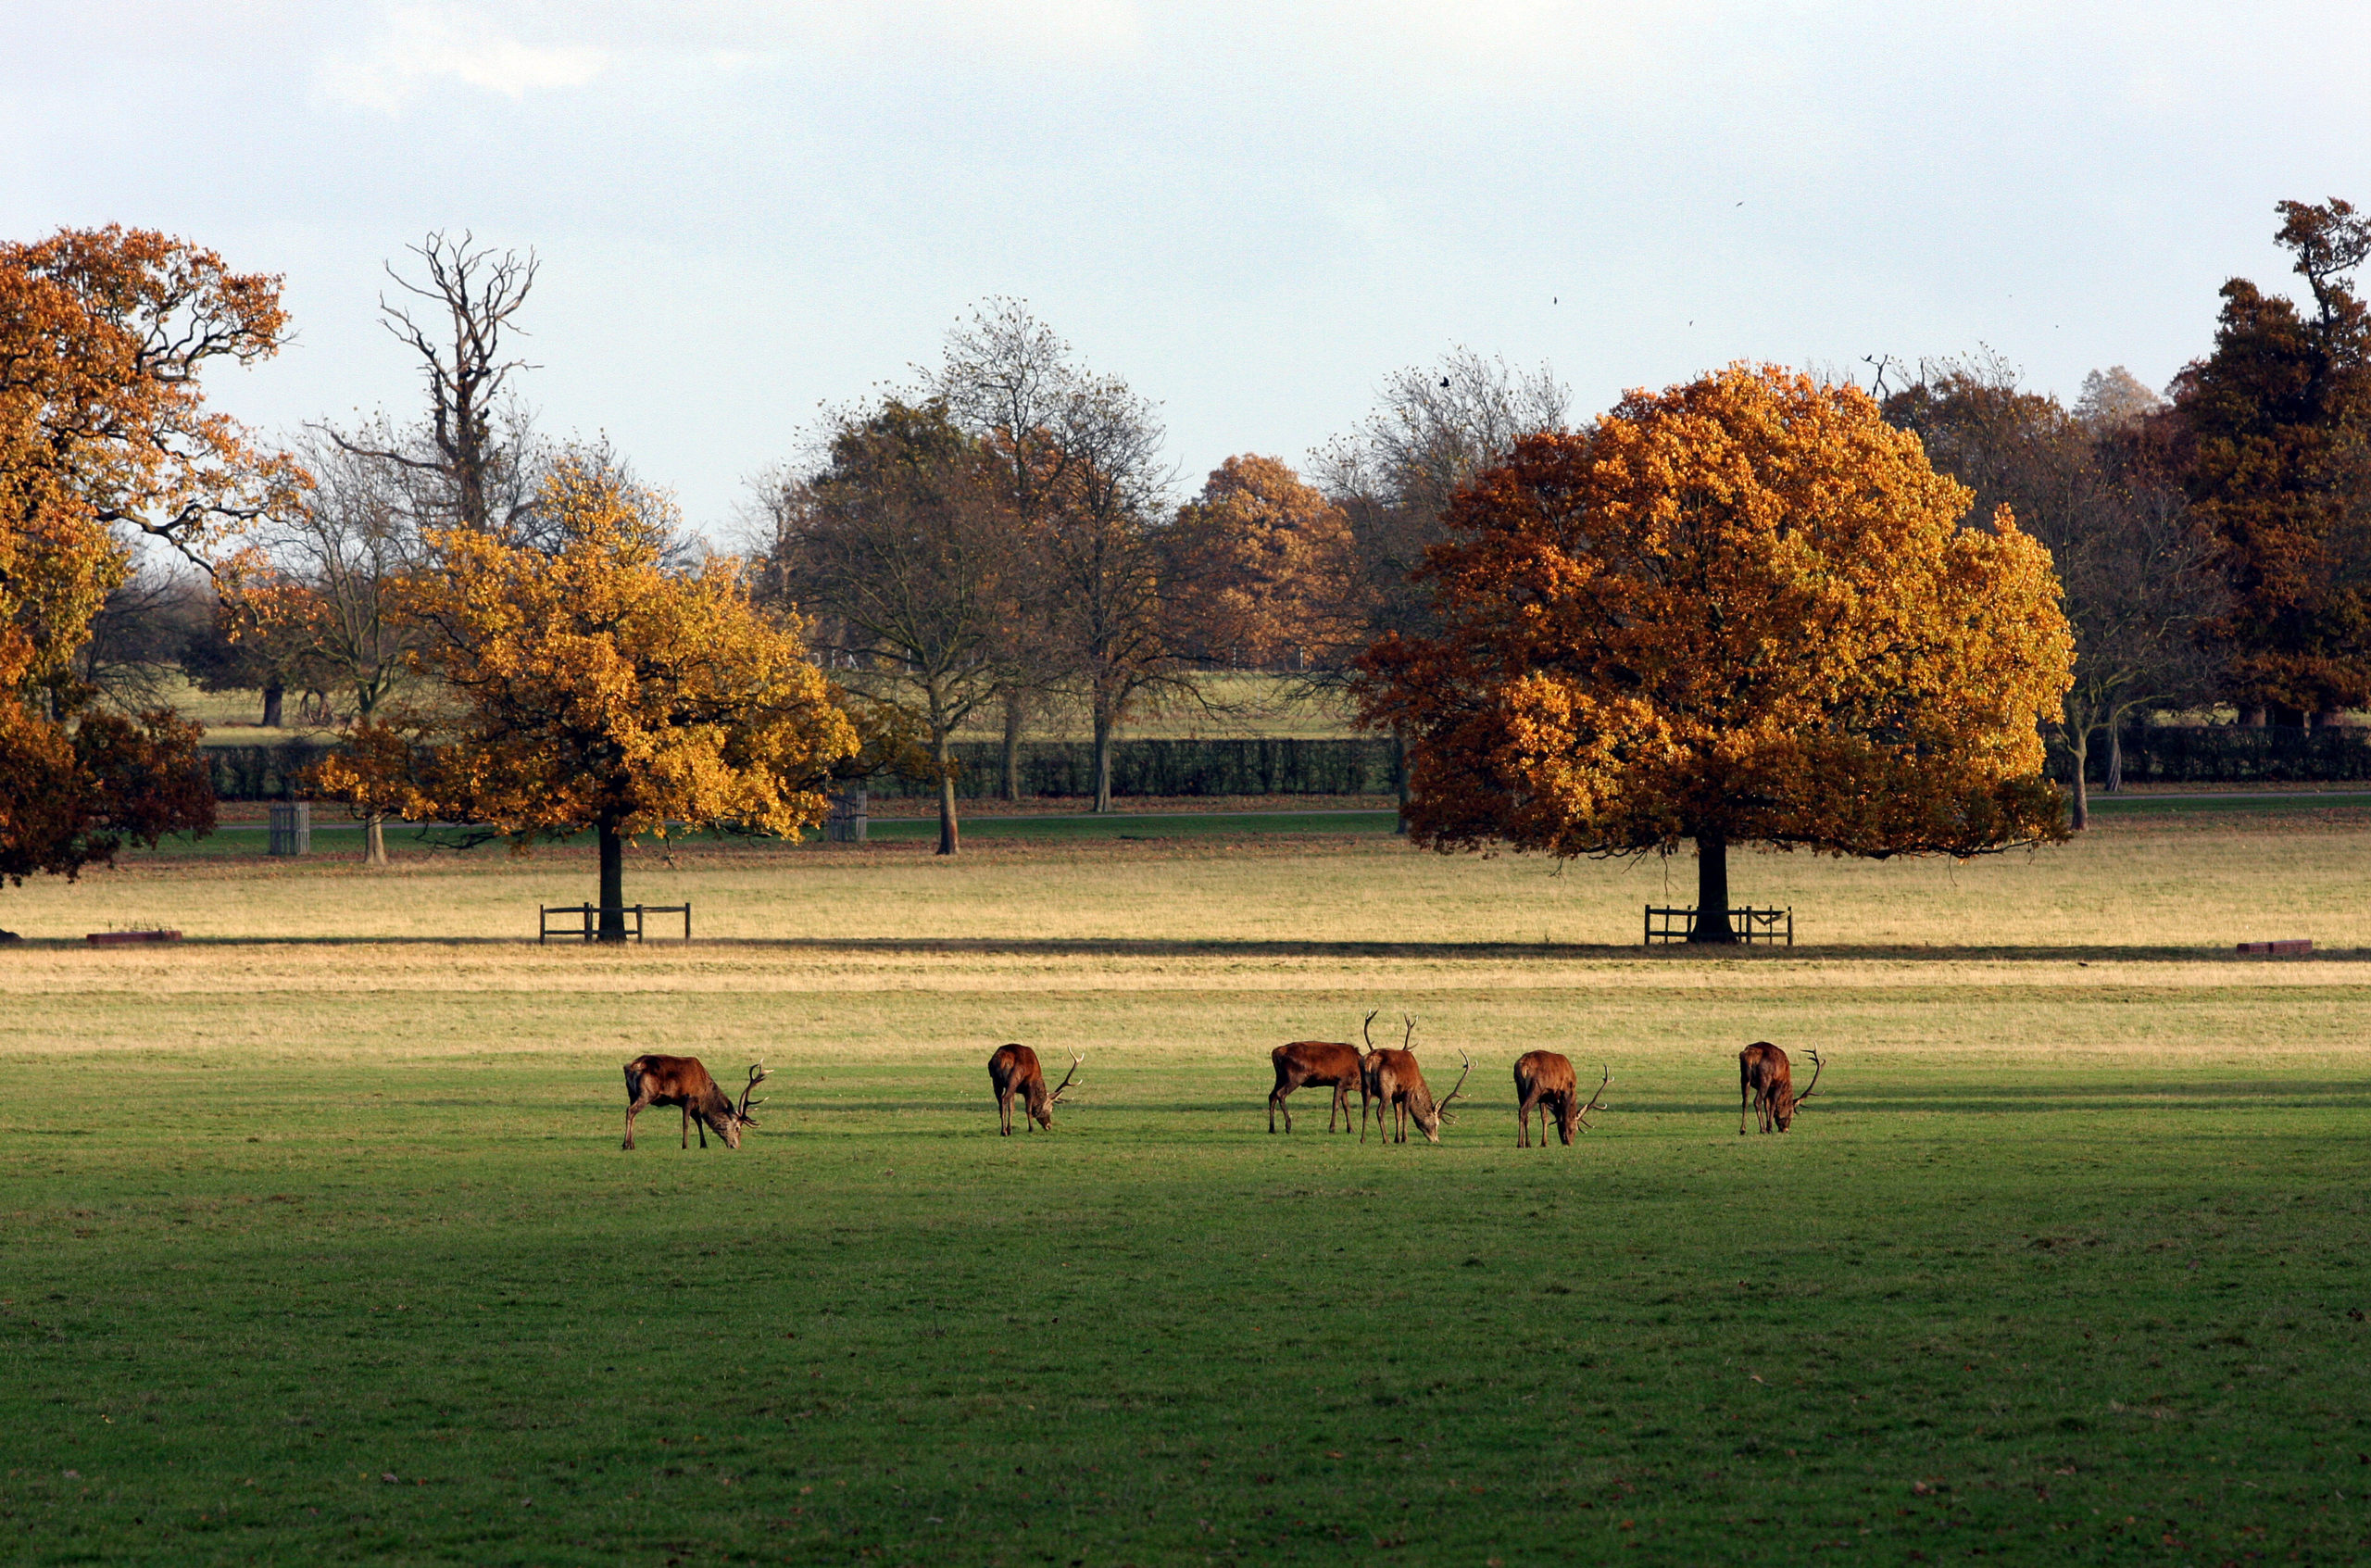 Stags grazing in the Deer Park.